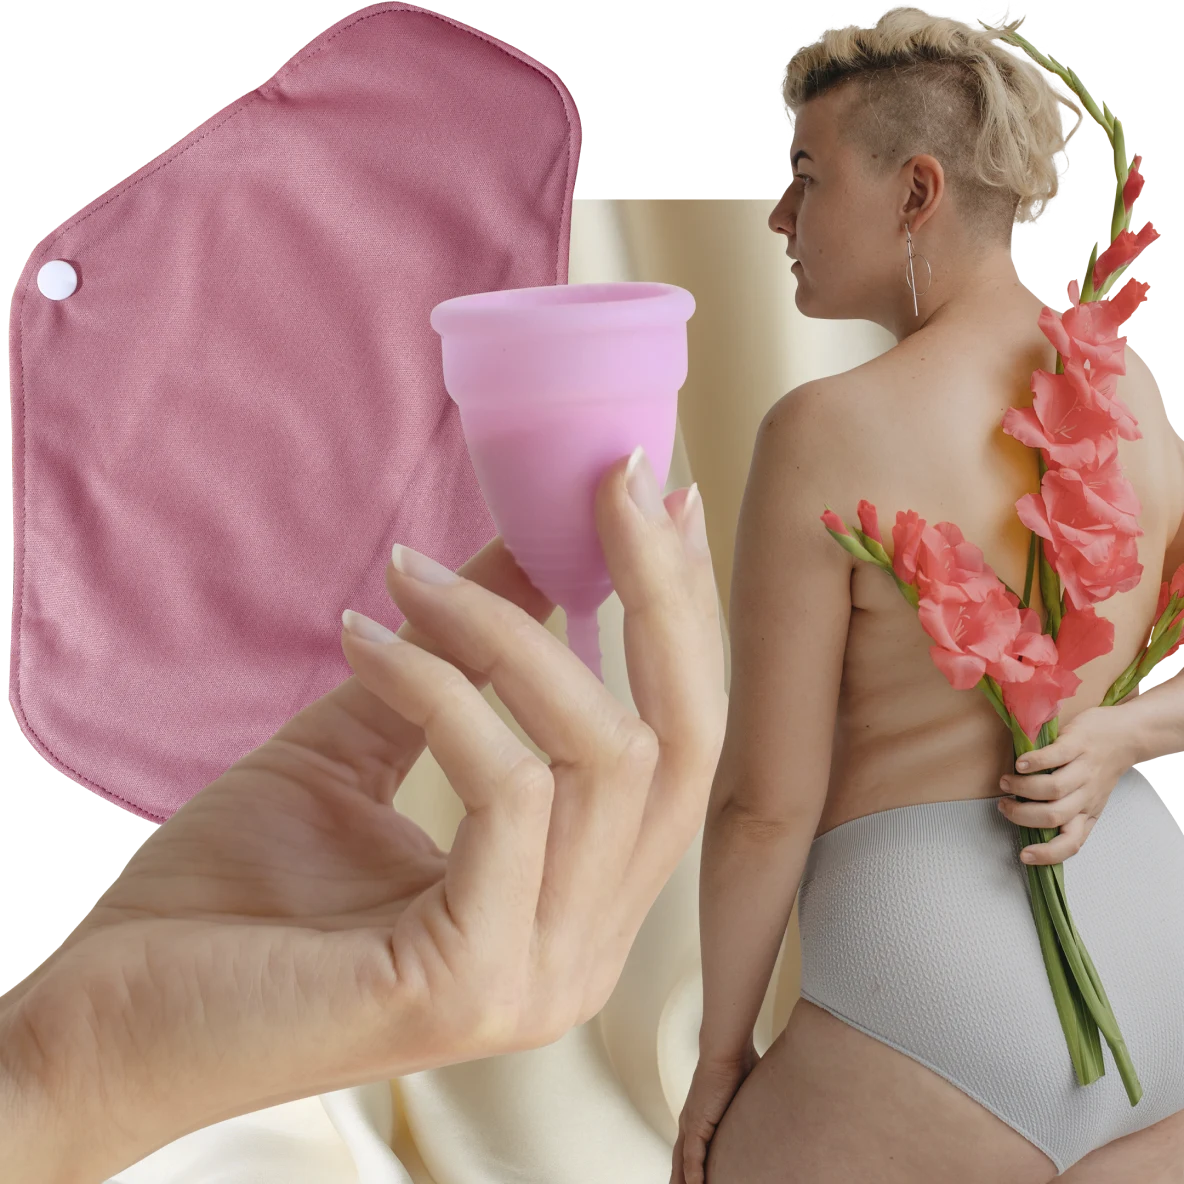 White hand holding a pink menstrual cup. Pink cloth pad at left. White woman with short blonde hair holds pink flowers behind her back on the right.